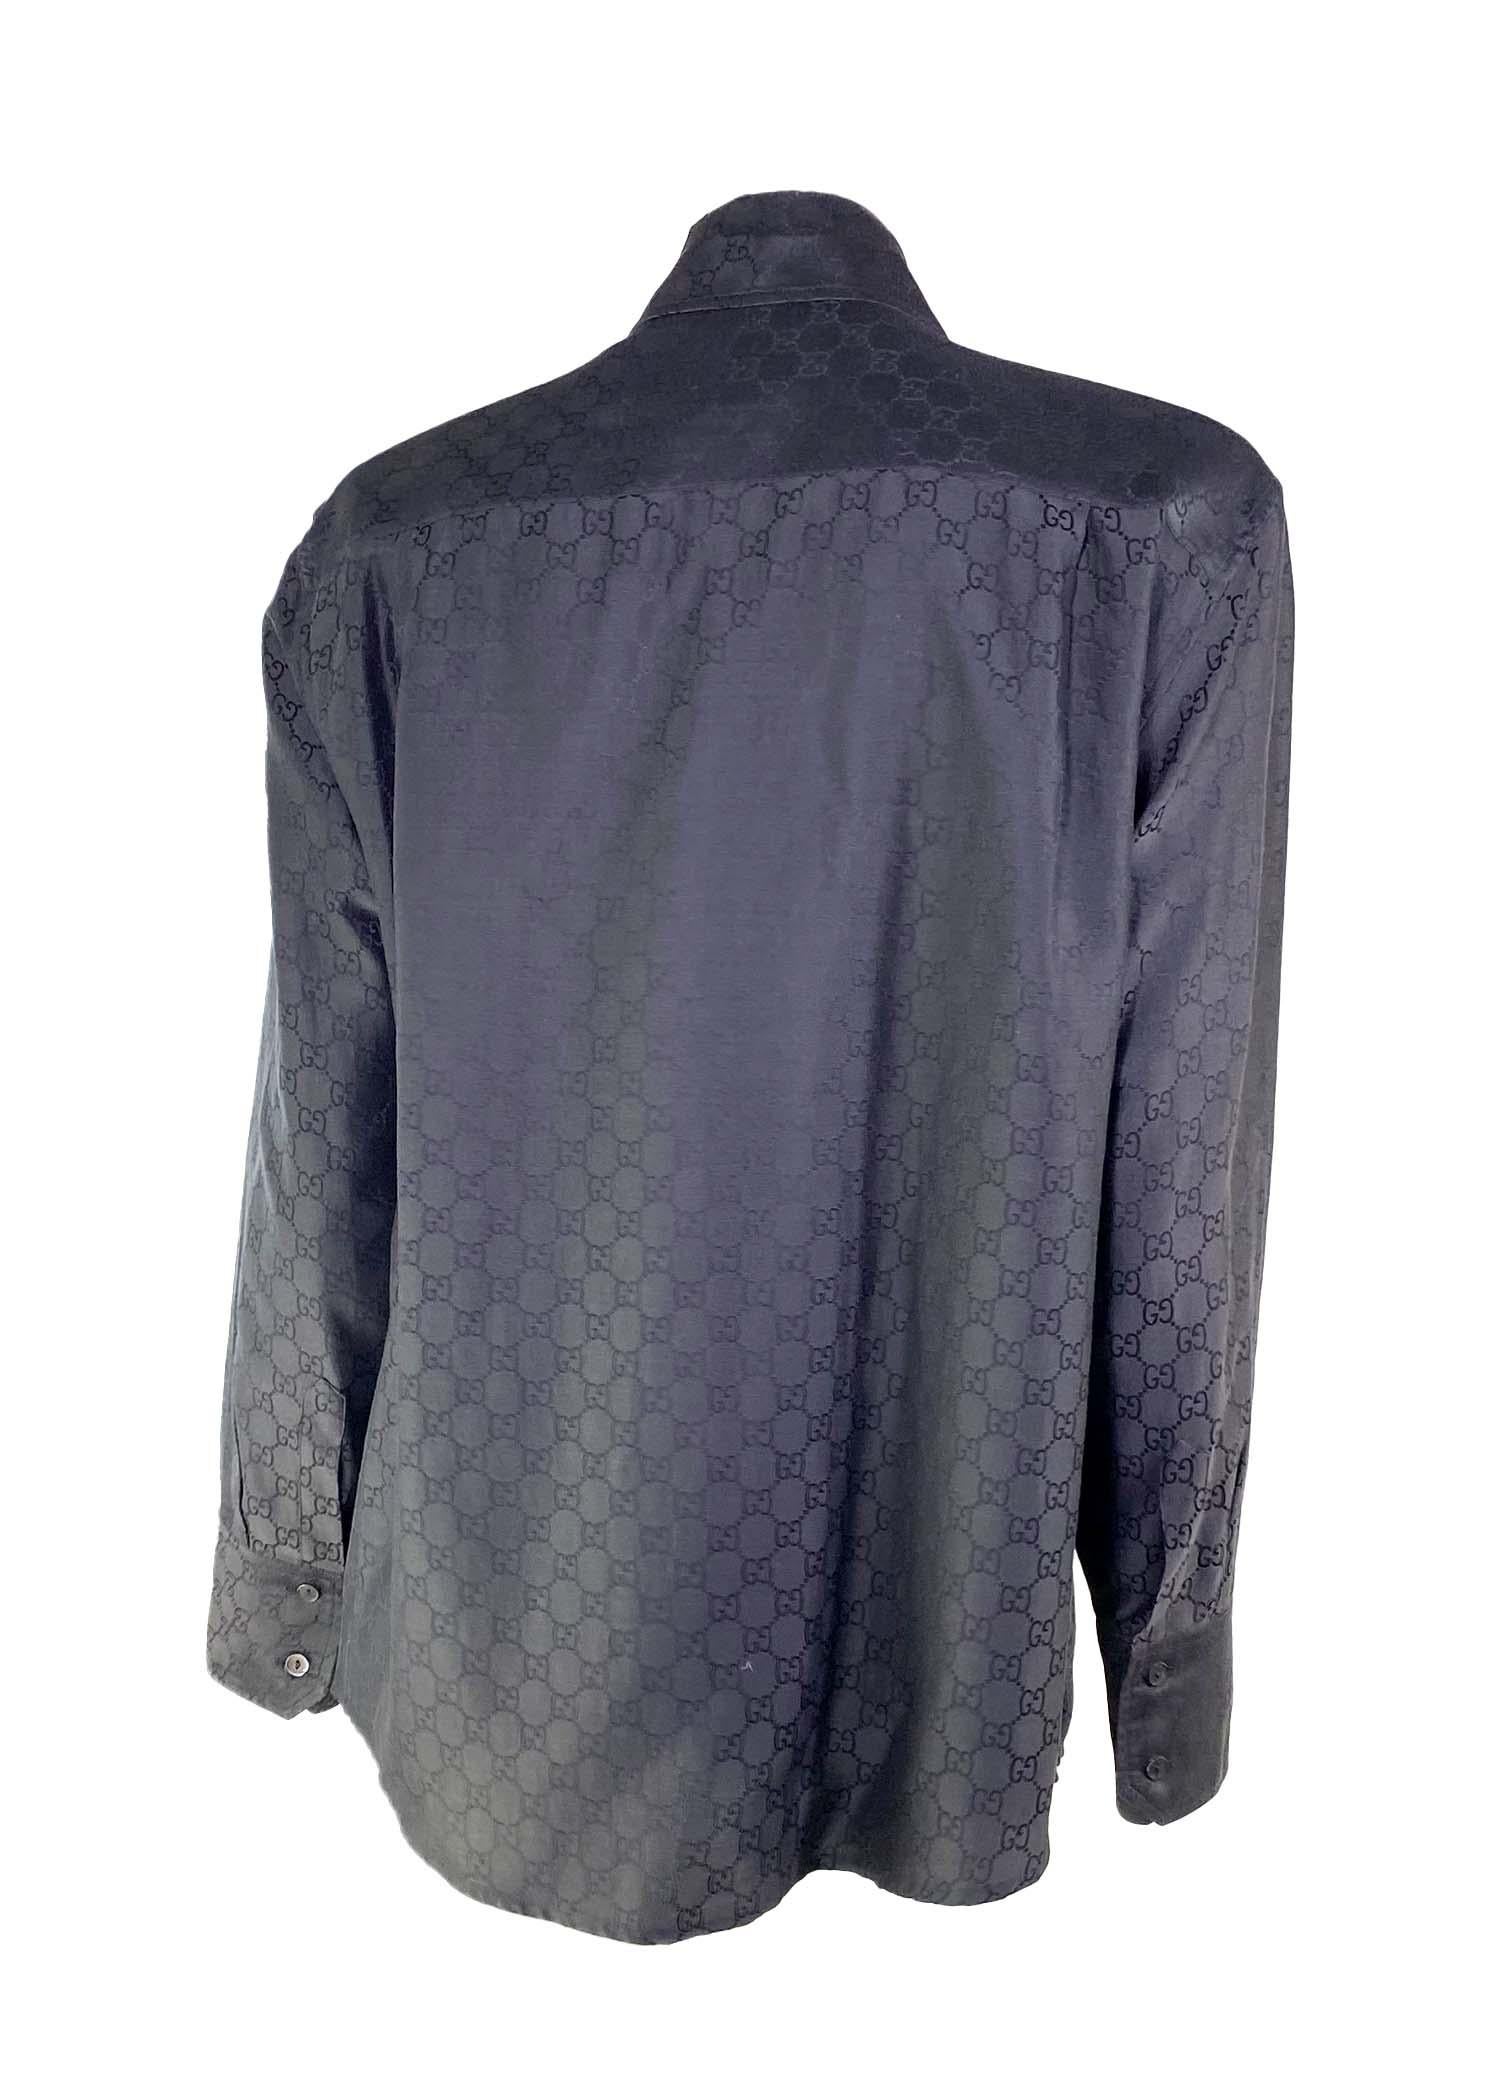 S/S 1998 Gucci by Tom Ford GG Monogram Black Cotton Silk Shoulder Pad Button Up In Excellent Condition For Sale In West Hollywood, CA